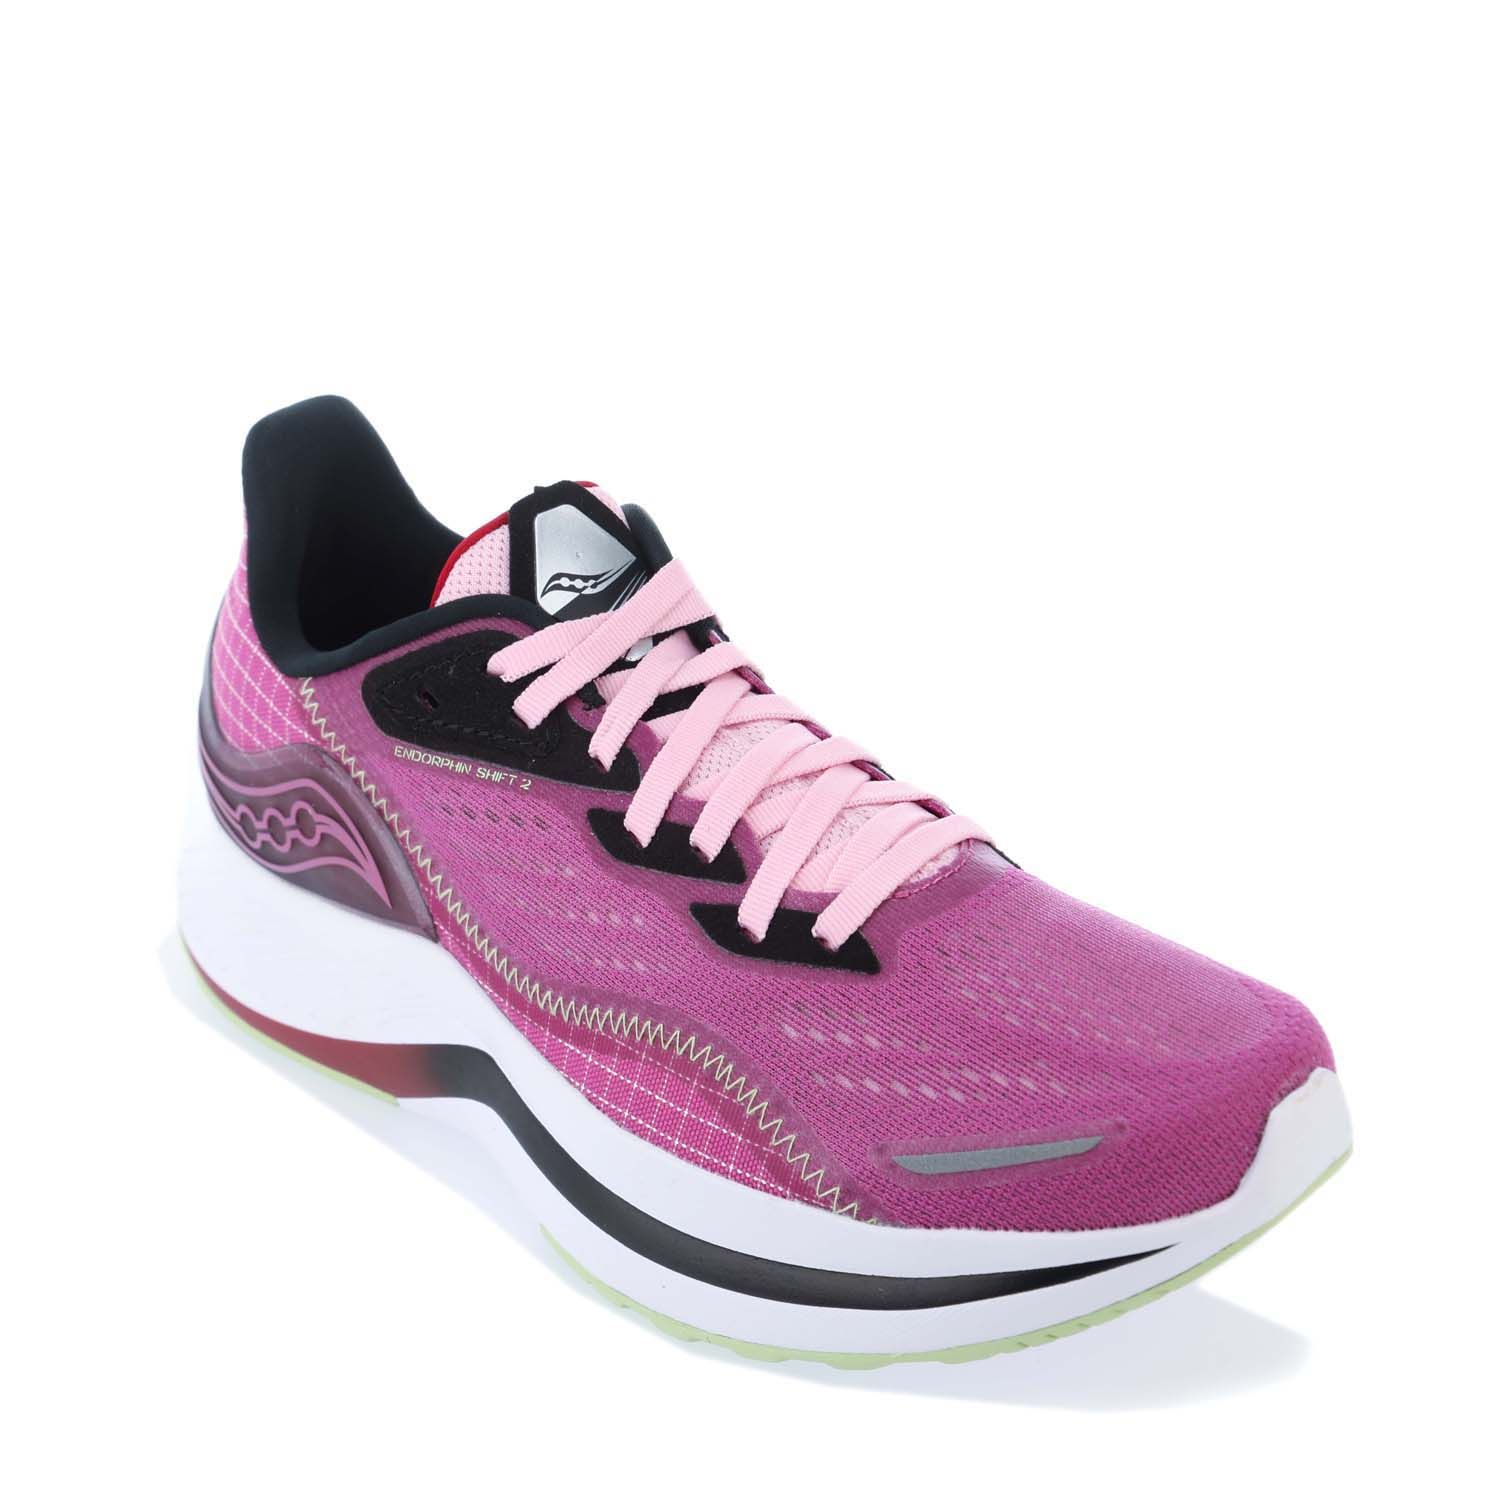 Pink Saucony Womens Endorphin Shift 2 Running Shoes - Get The Label